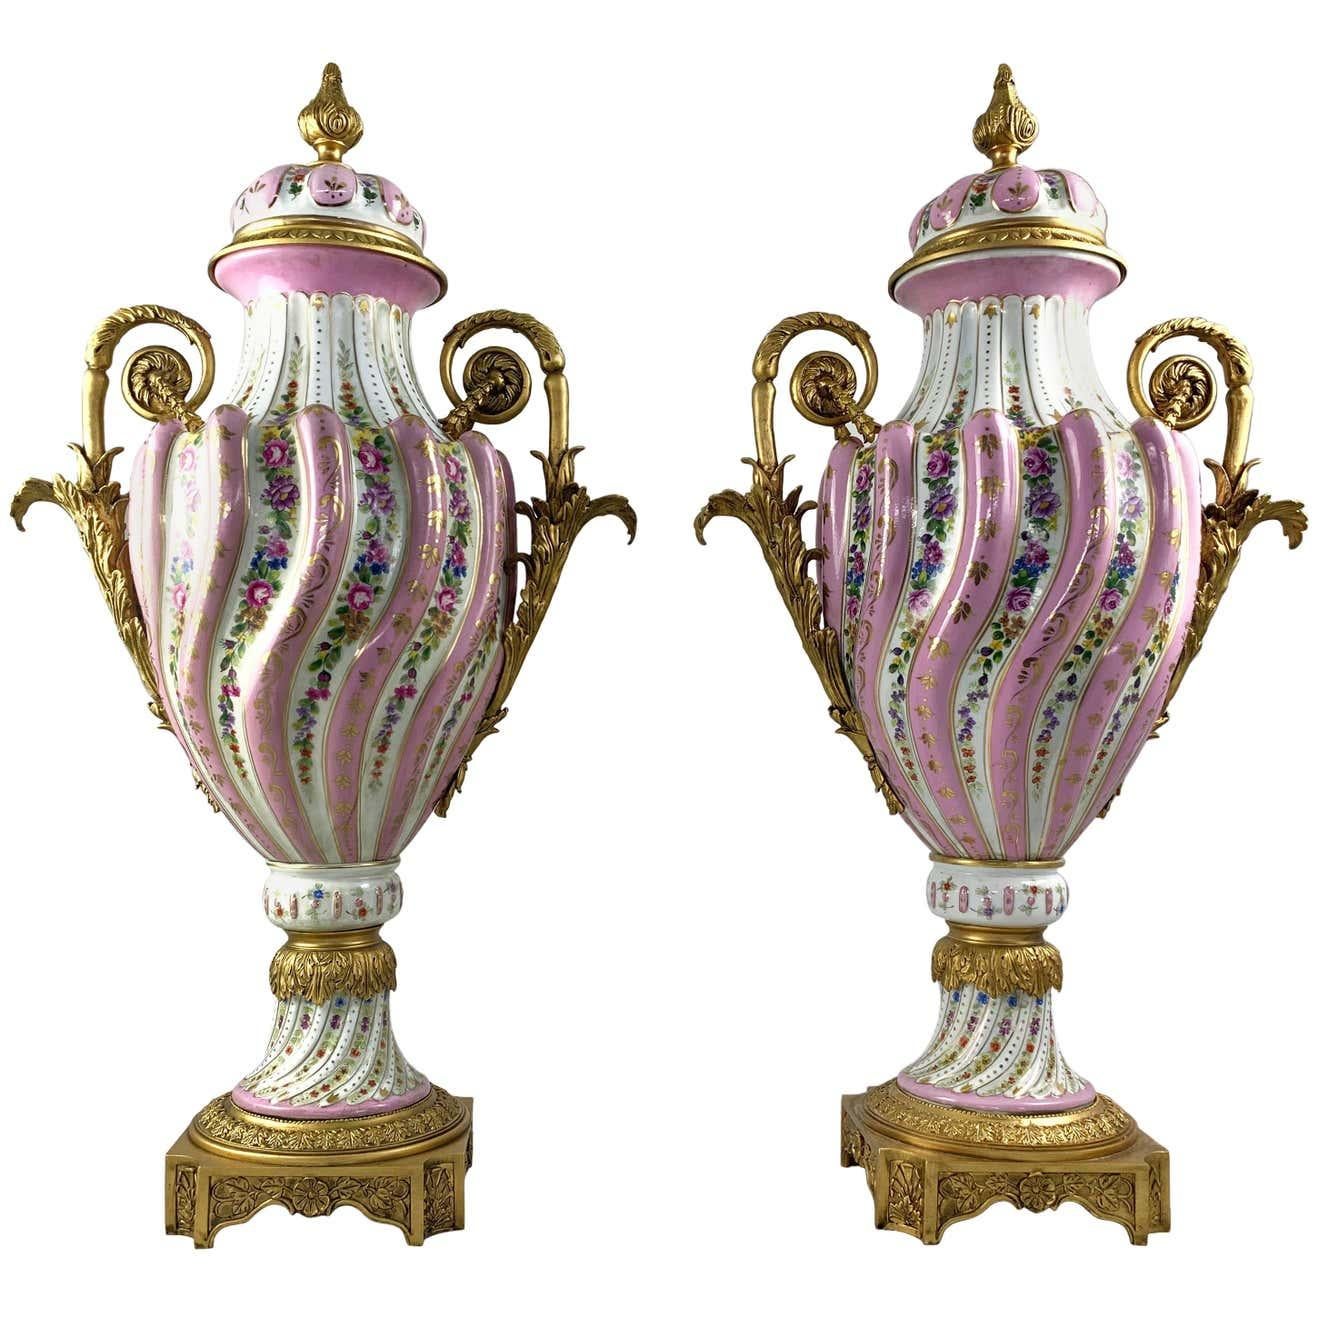 A fine pair of Sevres styleporcelain two handled vases and covers with ormolu mounts. 19th century. Each with spiral lobed decoration picked out with flowers on a pink ground. The mounts cast with classical motifs. Supported on a shaped square base.